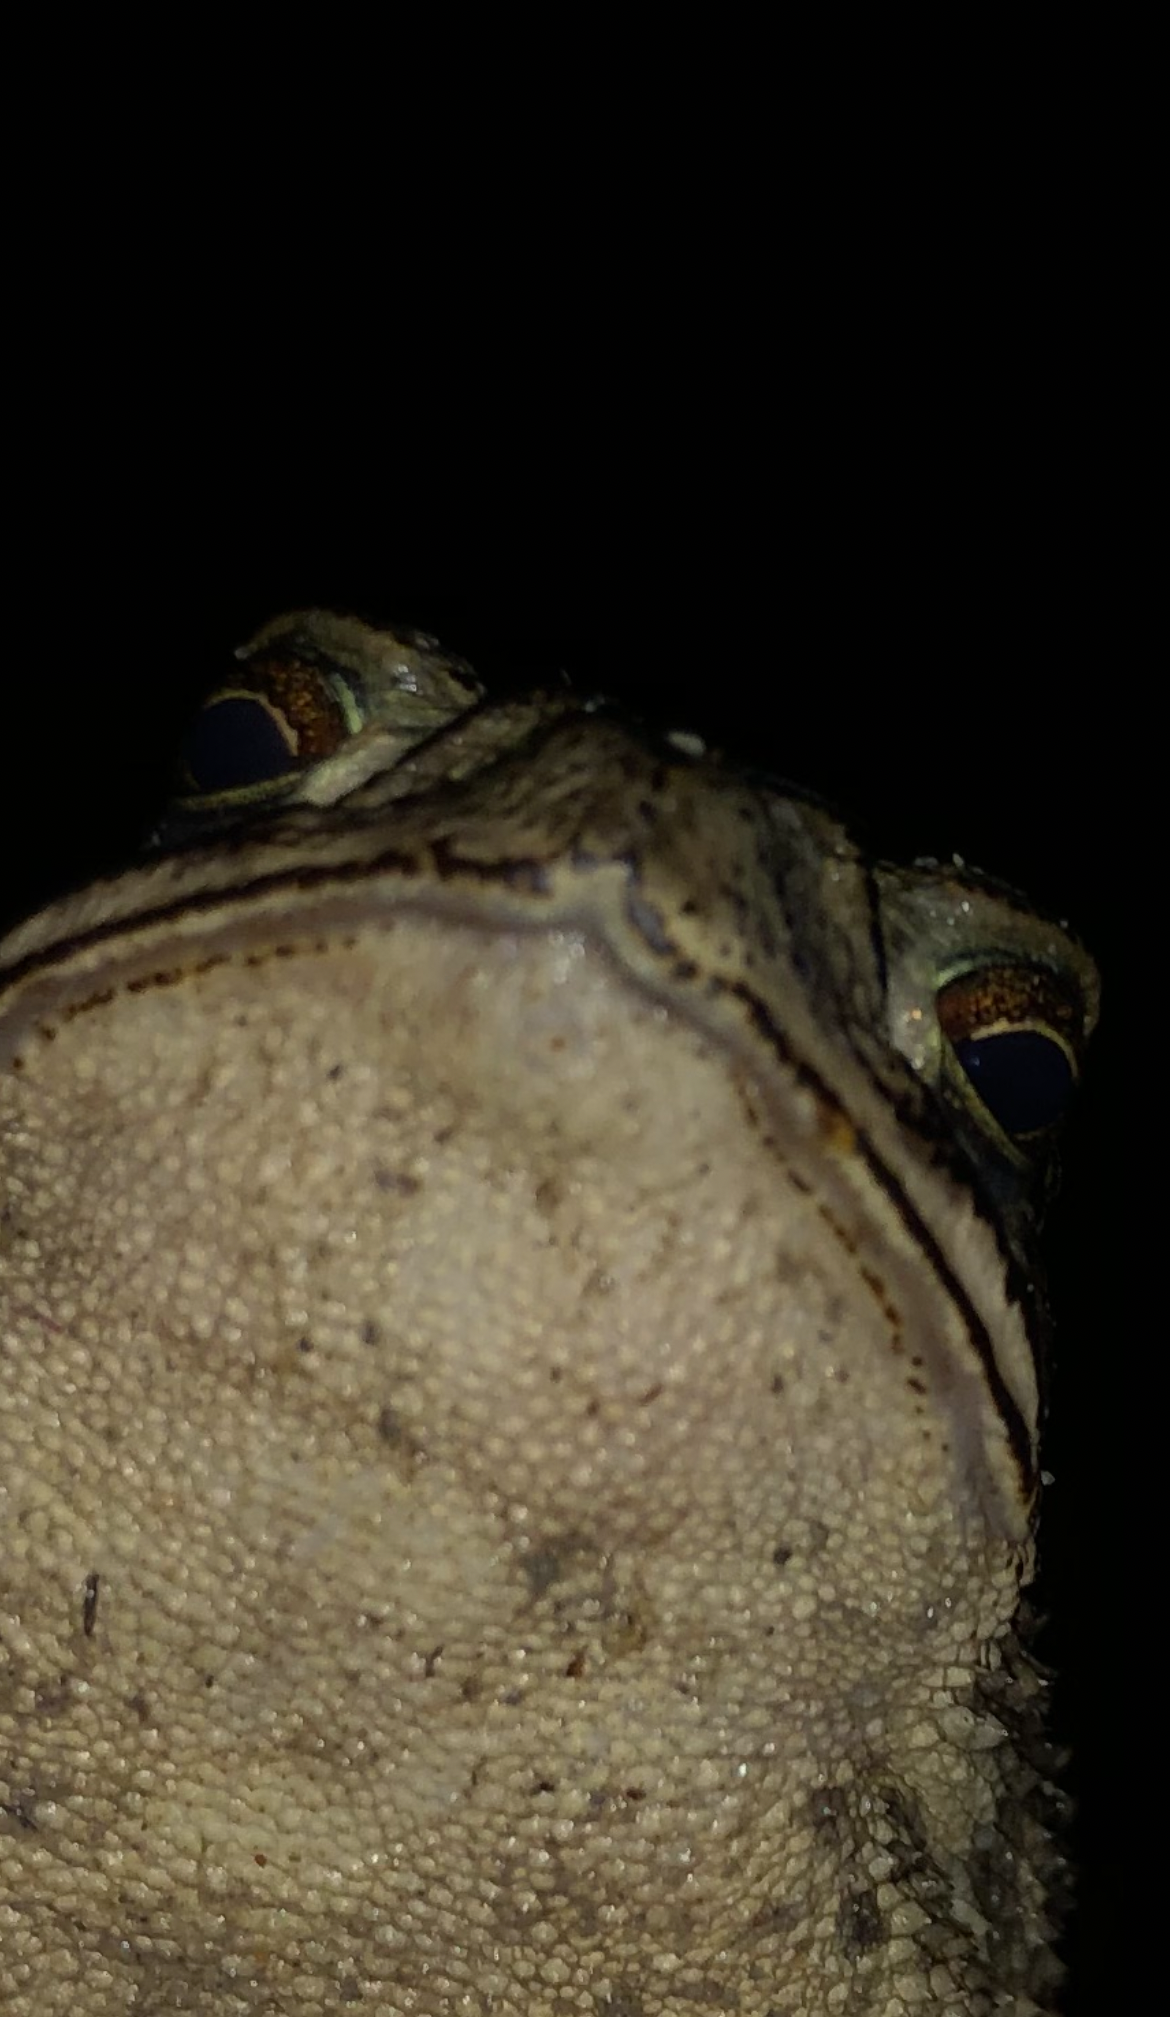 High Quality Judgy Toad Blank Meme Template